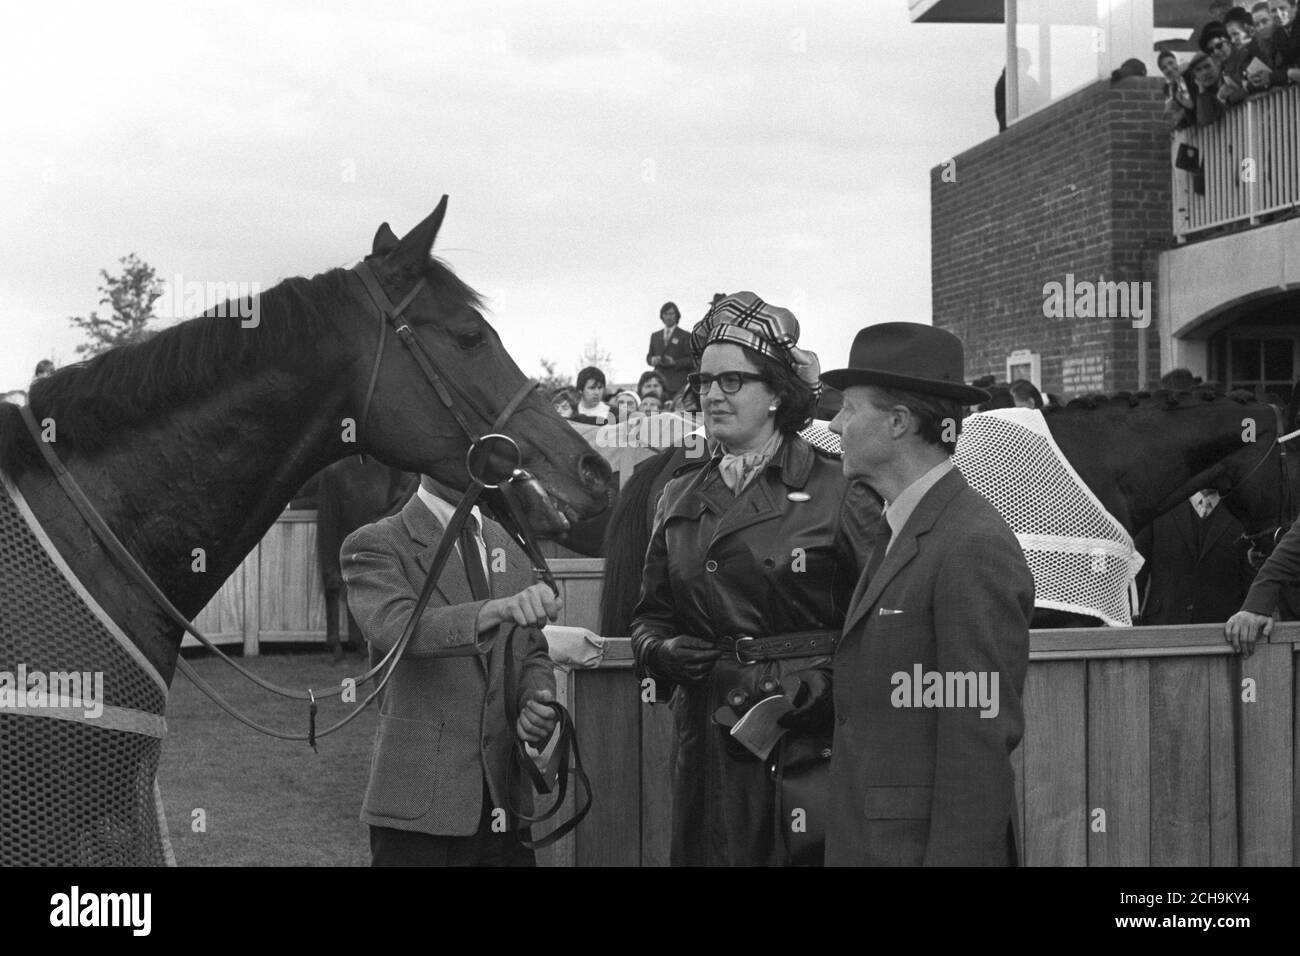 Brigadier Gerard with his joint owners, Mr and Mrs John Hislop, after winning the Champion Stakes at Newmarket today for the second year in succession. Ridden by Joe Mercer and running for the last time in his 18 race/17 wins career, he added £35,048.20 to his earnings by beating French challenger Riverman, with Lord David third. Stock Photo